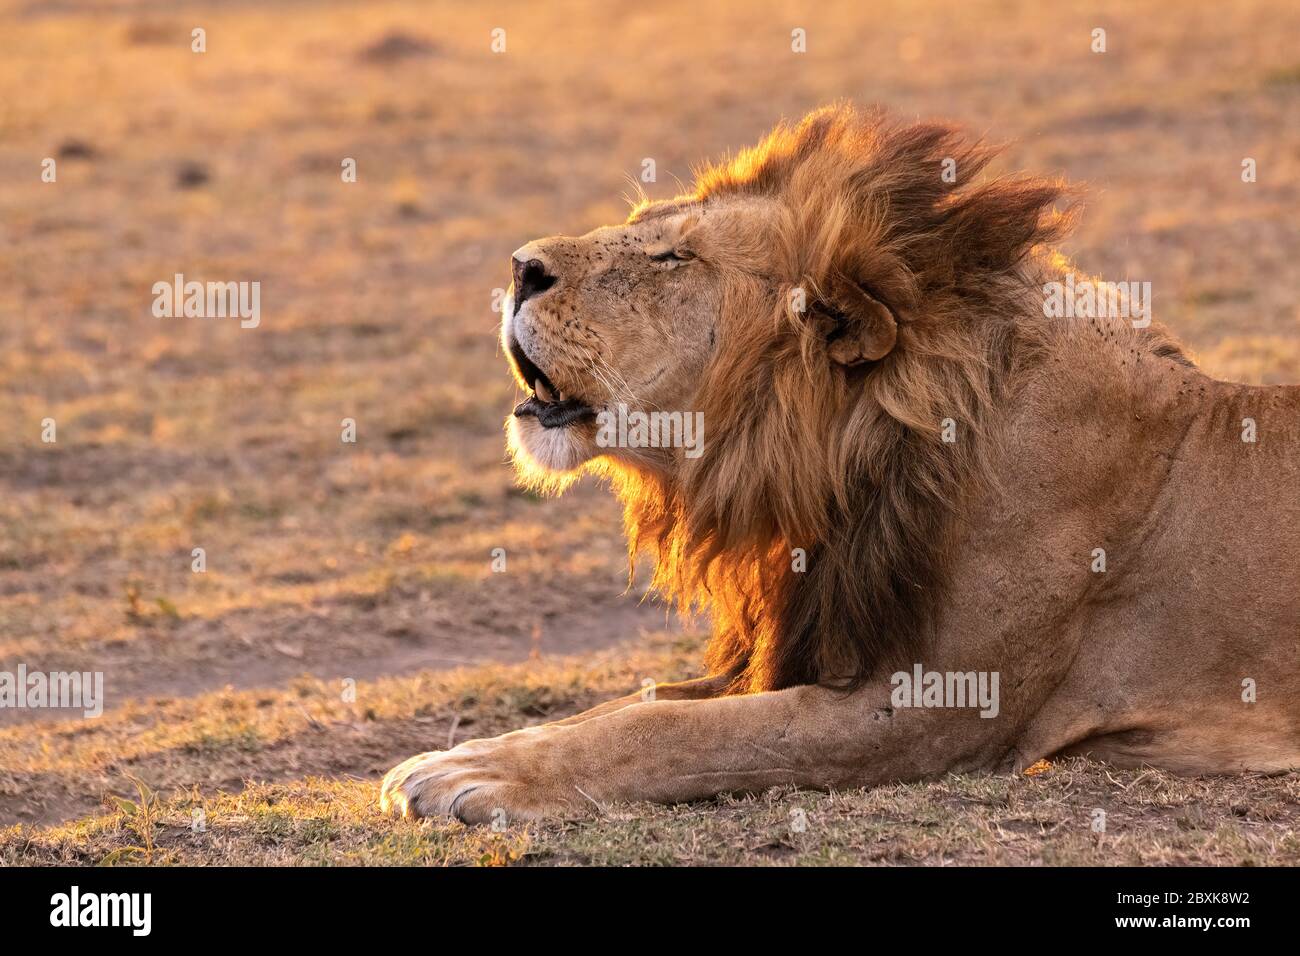 Male lion with mouth open, calling out to the rest of the pride, backlit by the sun. Image taken in the Maasai Mara National Reserve, Kenya. Stock Photo